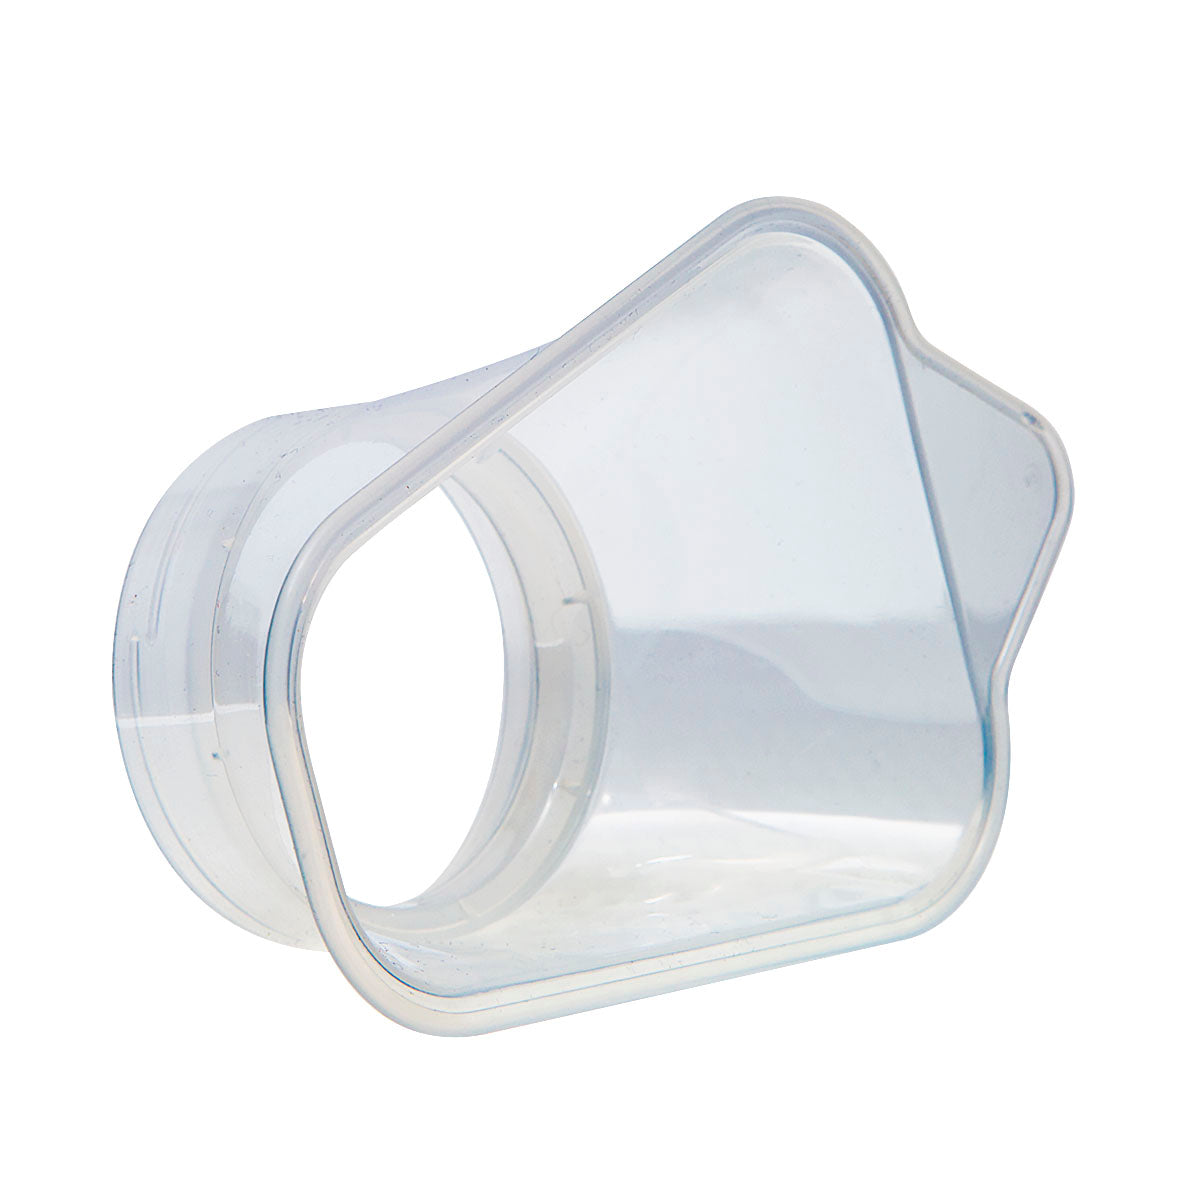 B351-4x 24H Urine Collection Bag and Funnel